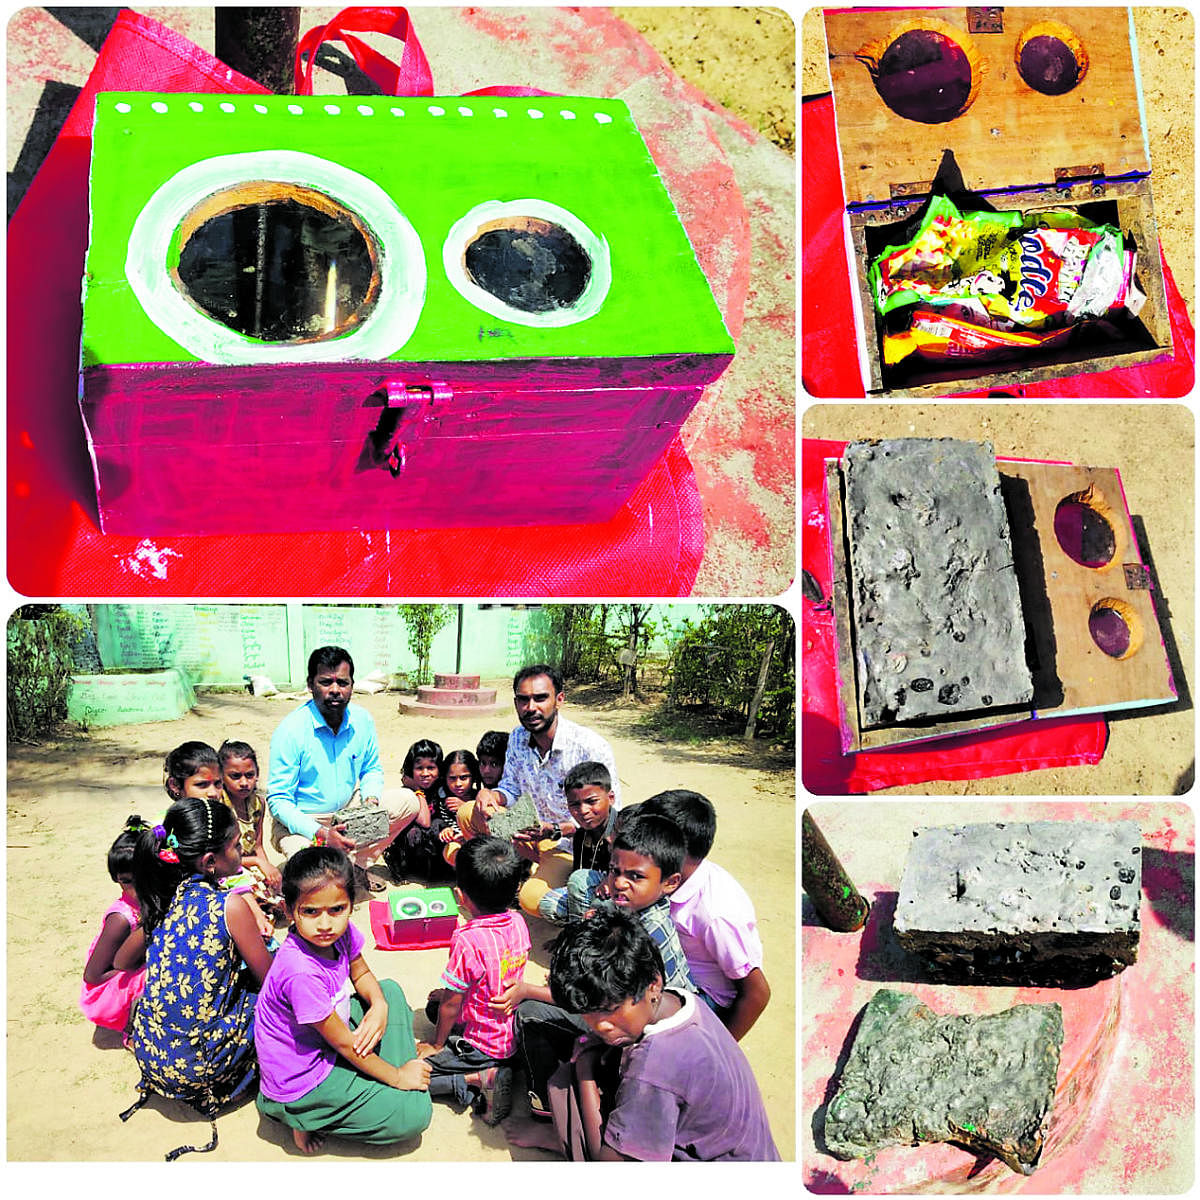 A model prepared by Government Lower Primary school, Mulluru, teacher C S Satish, to produce bricks from plastic waste.